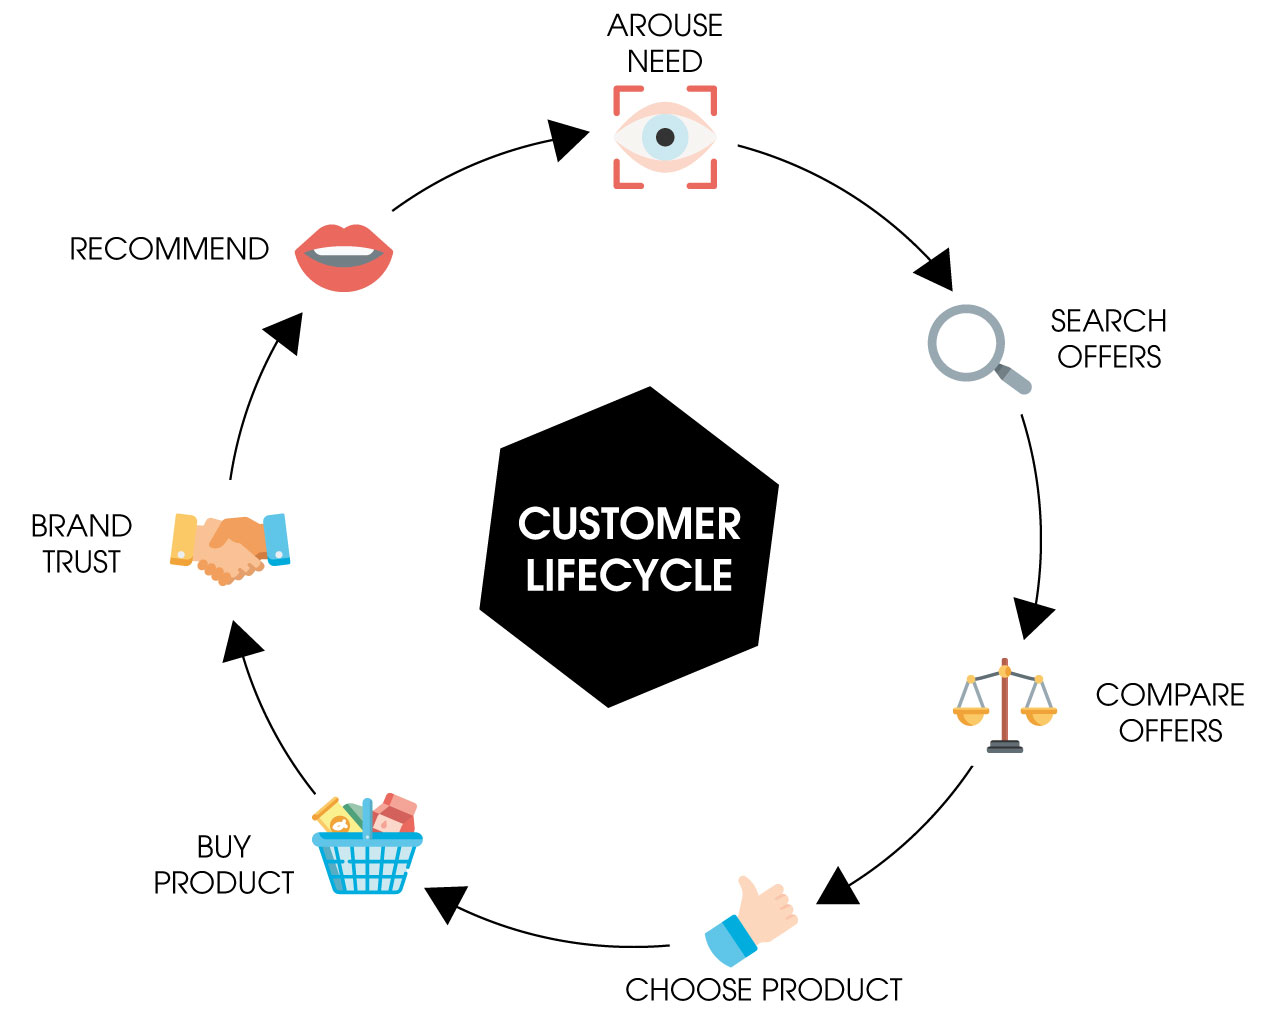 The graphic shows the customer lifecycle as a cycle.